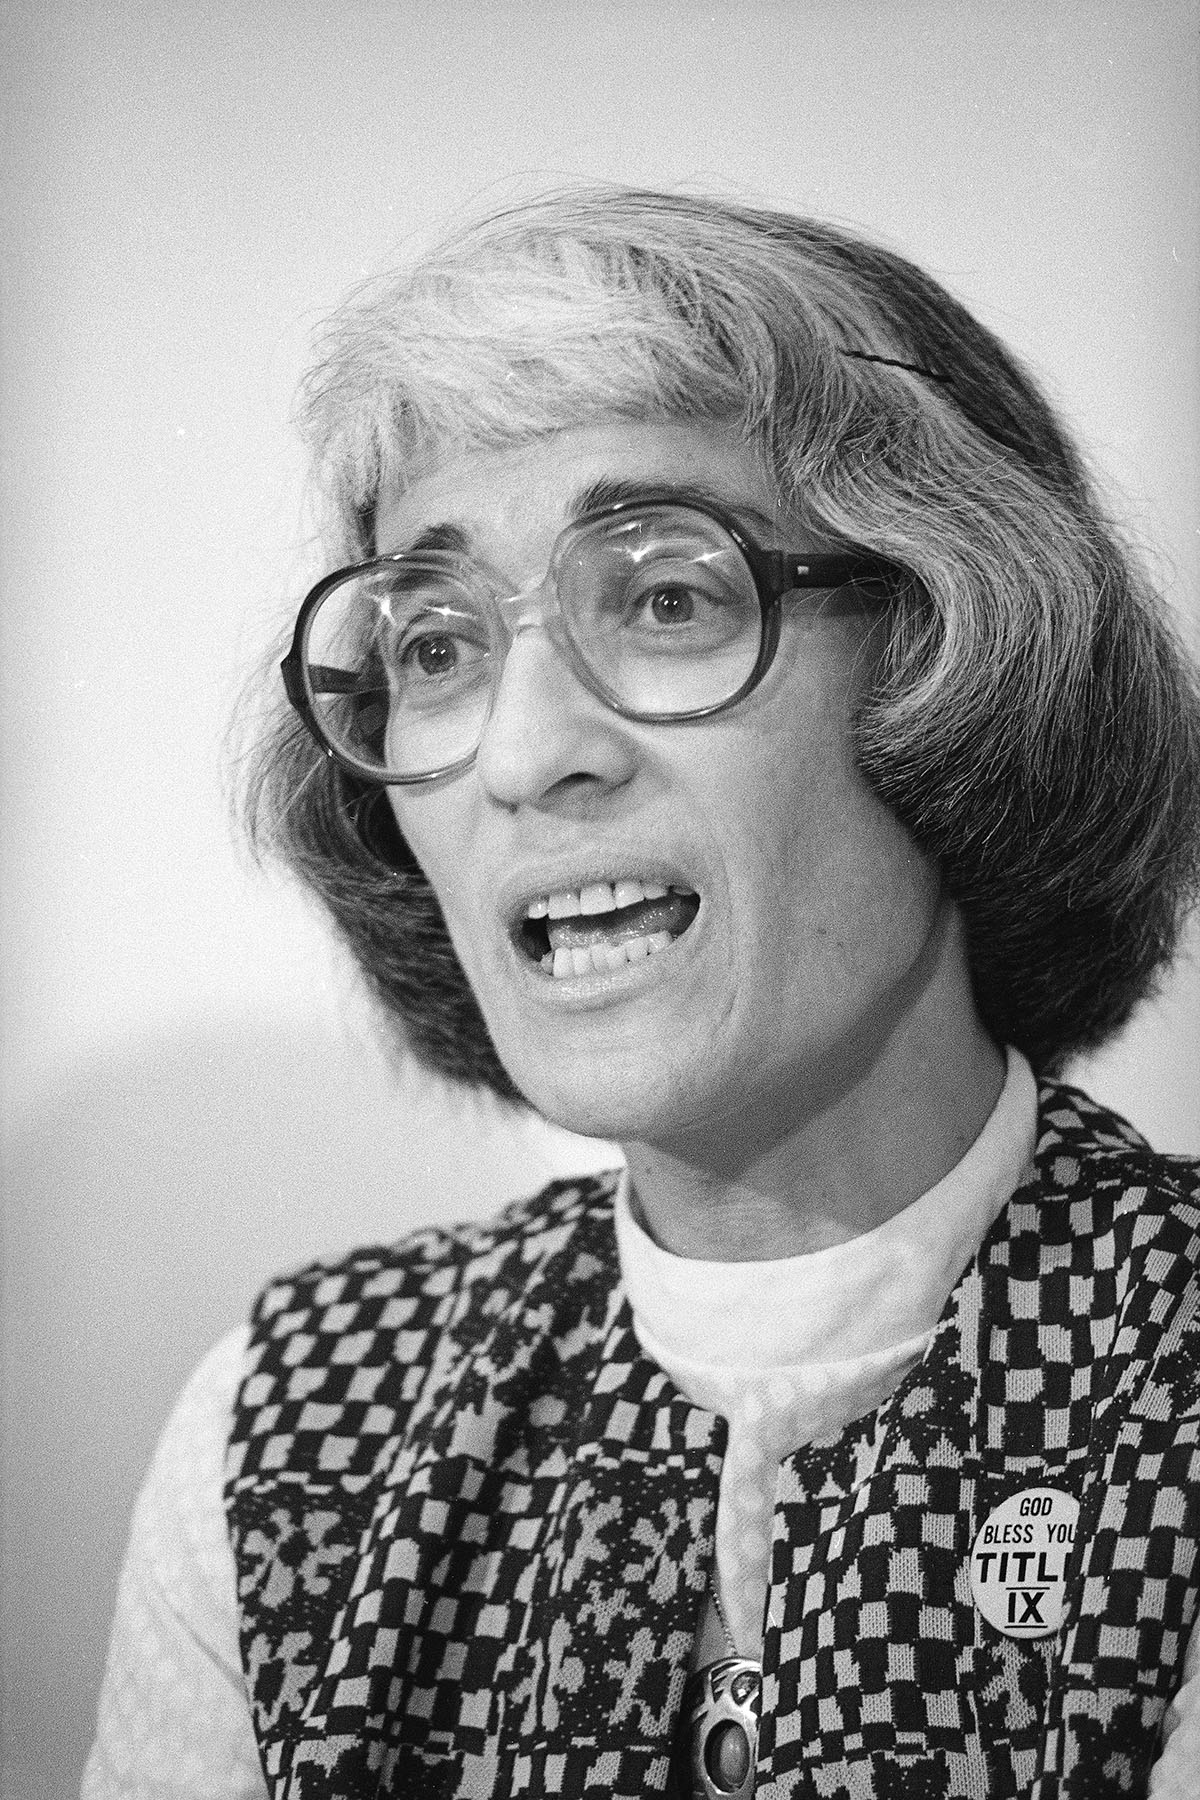 Portrait of Bernice Sandler, she wears a pin that reads "god bless you Title IX" on her vest.